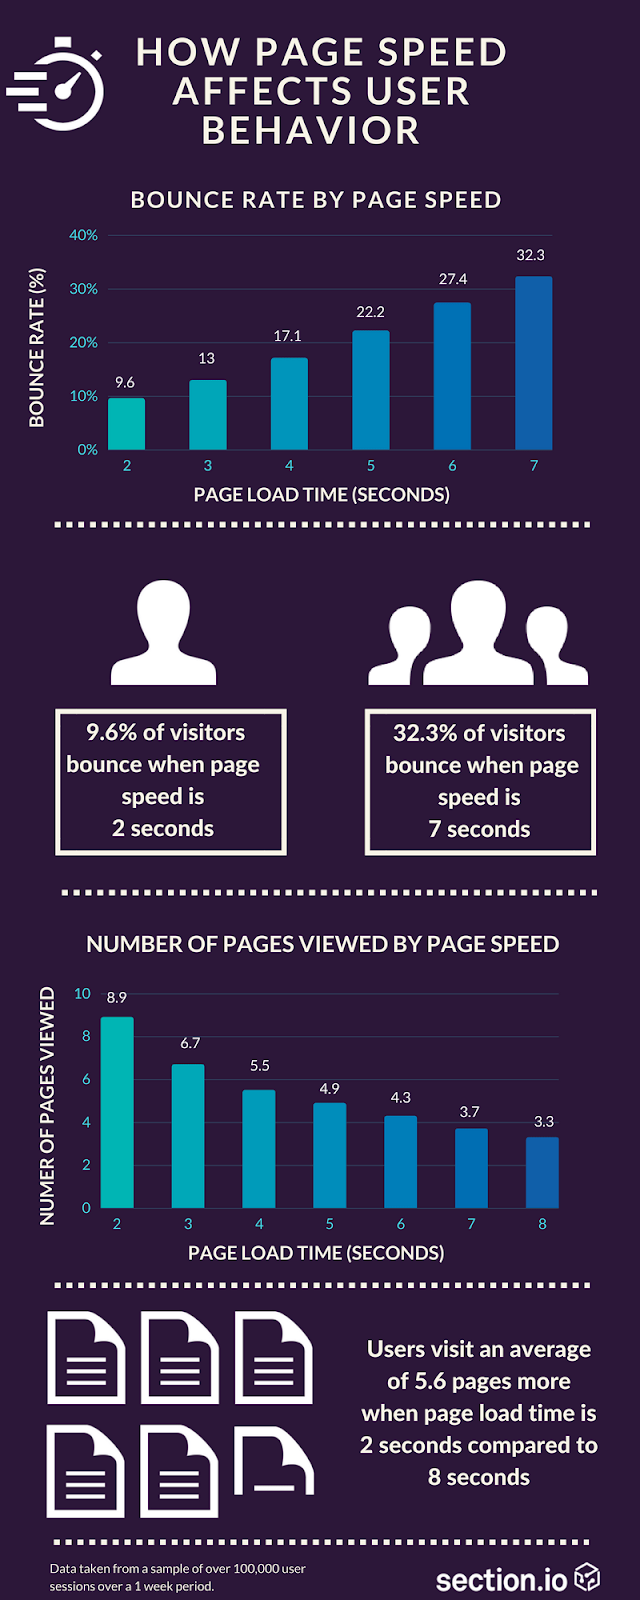 UX design and page speed affect SEO directly